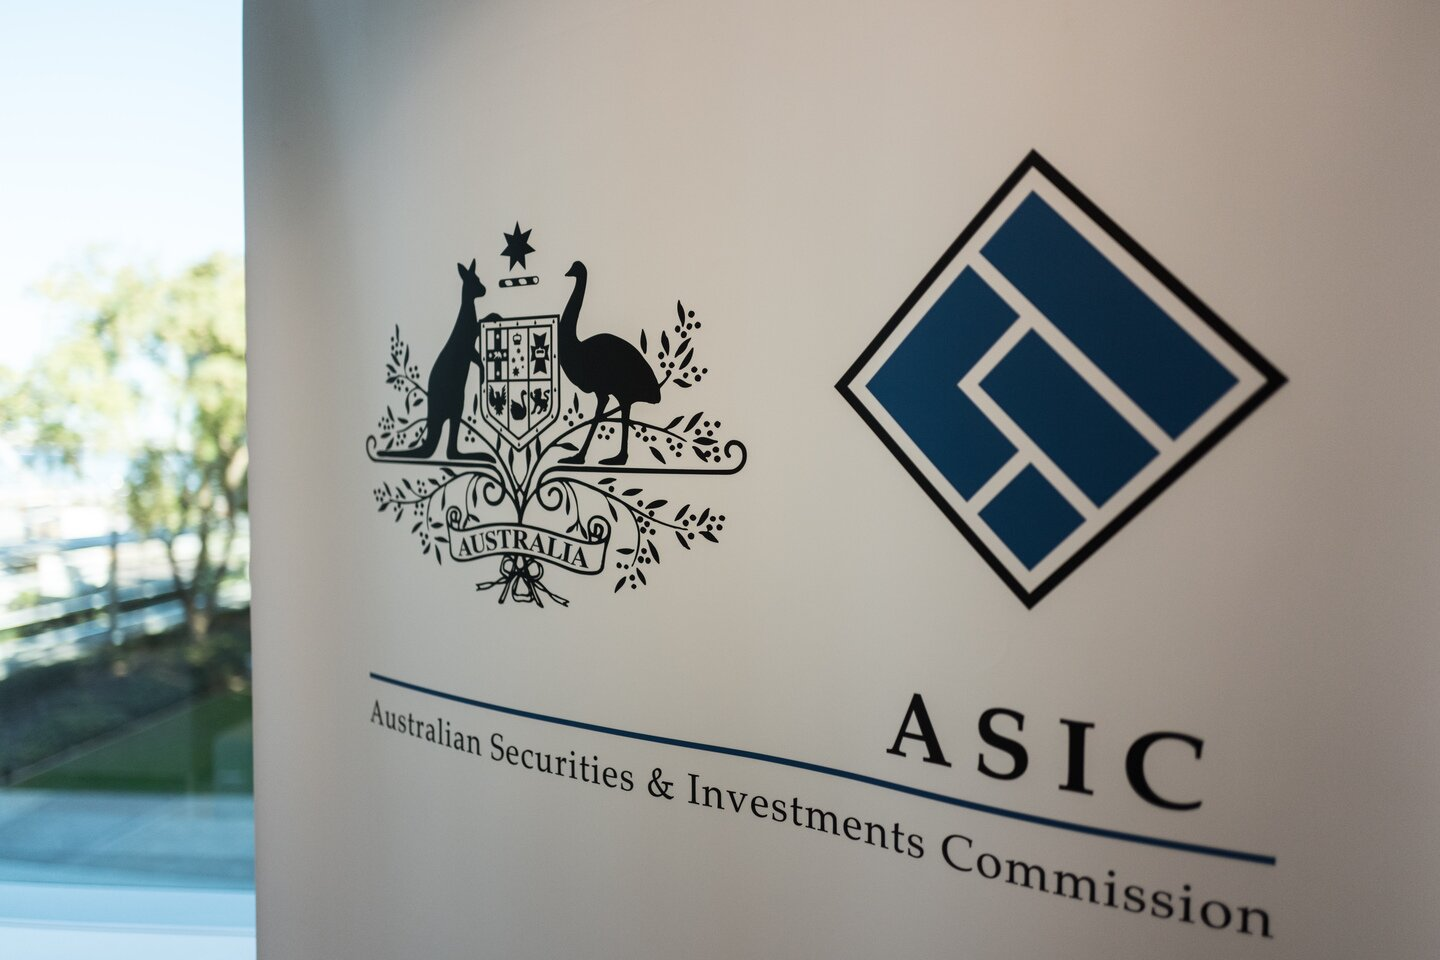 ASIC investigates cryptocurrency firm NGS Crypto, now rebranded as Hiddup, for alleged misconduct.